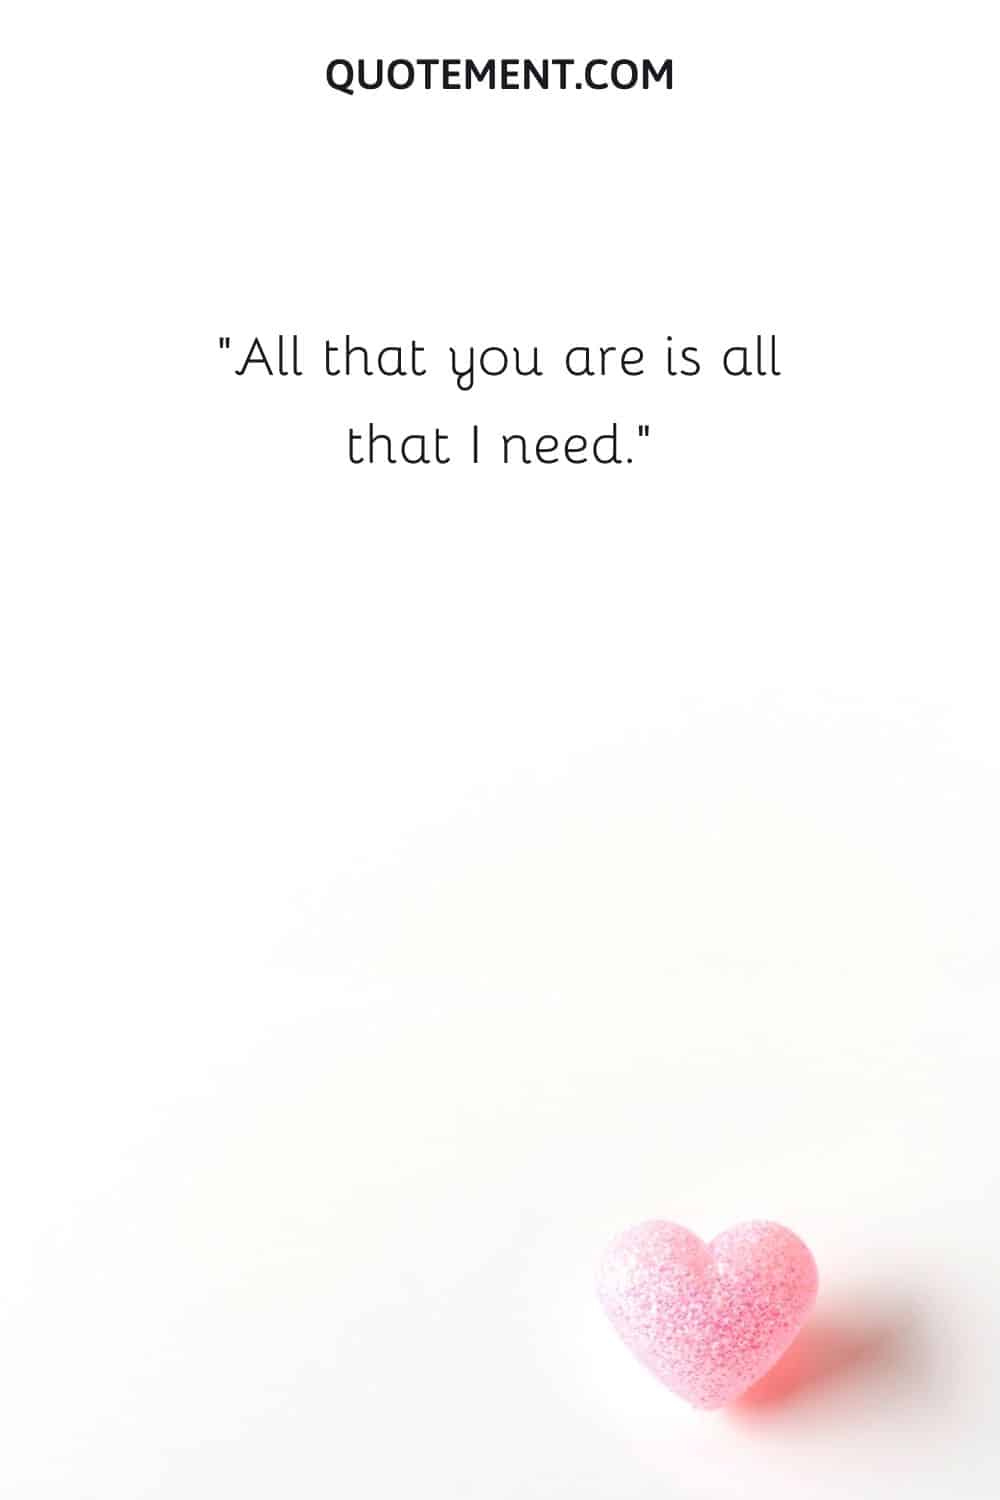 All that you are is all that I need.